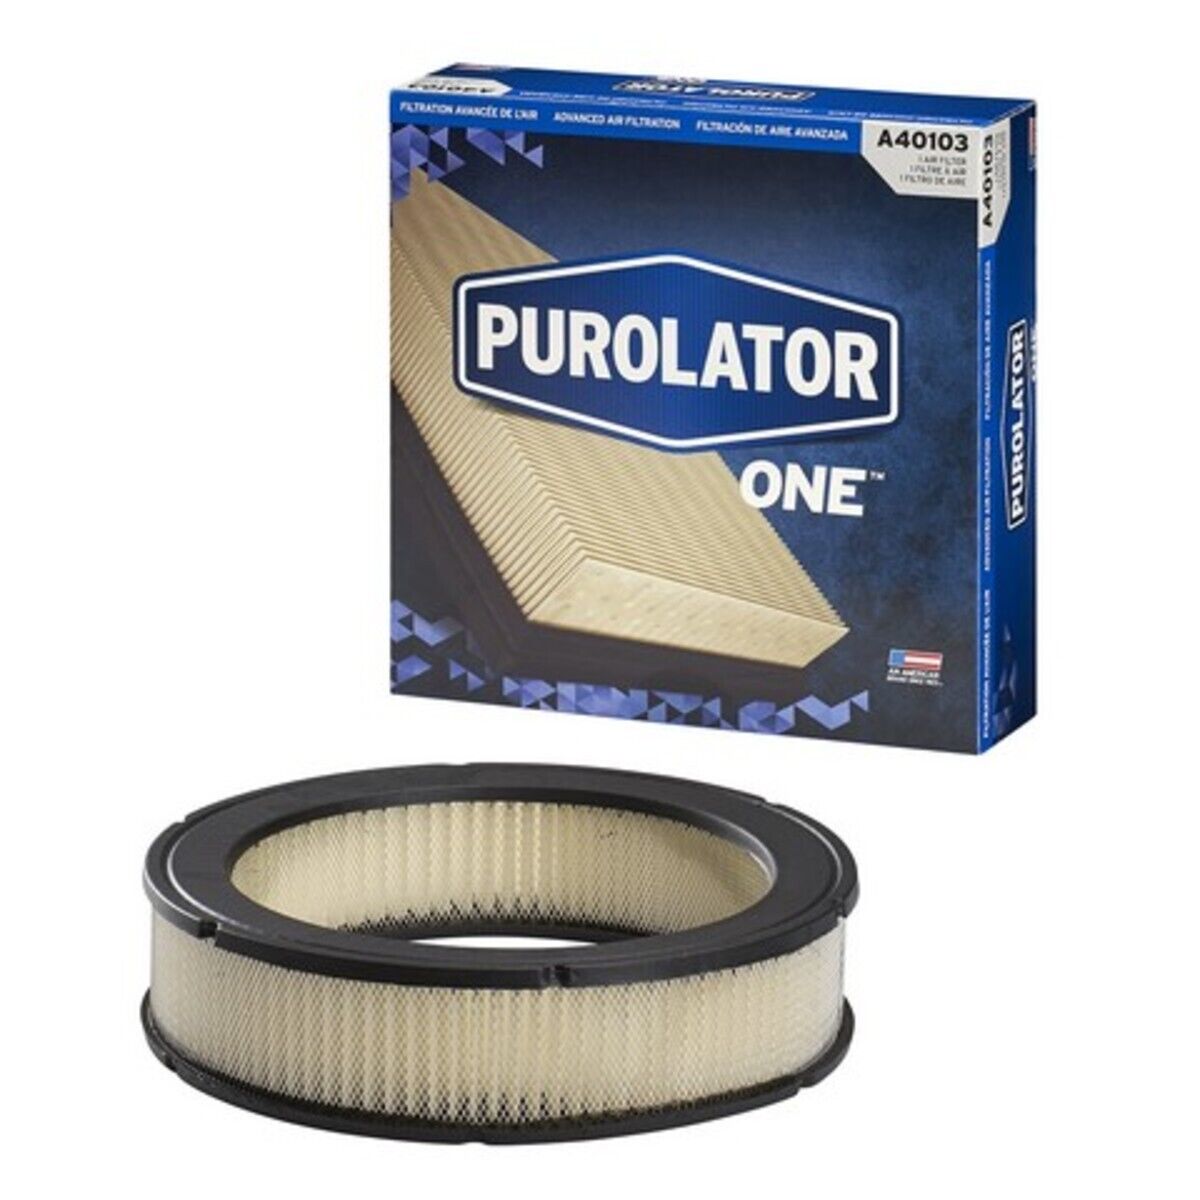 A40103 Purolator Air Filter for Chevy Luv S10 Pickup S-10 BLAZER S15 Jimmy Truck